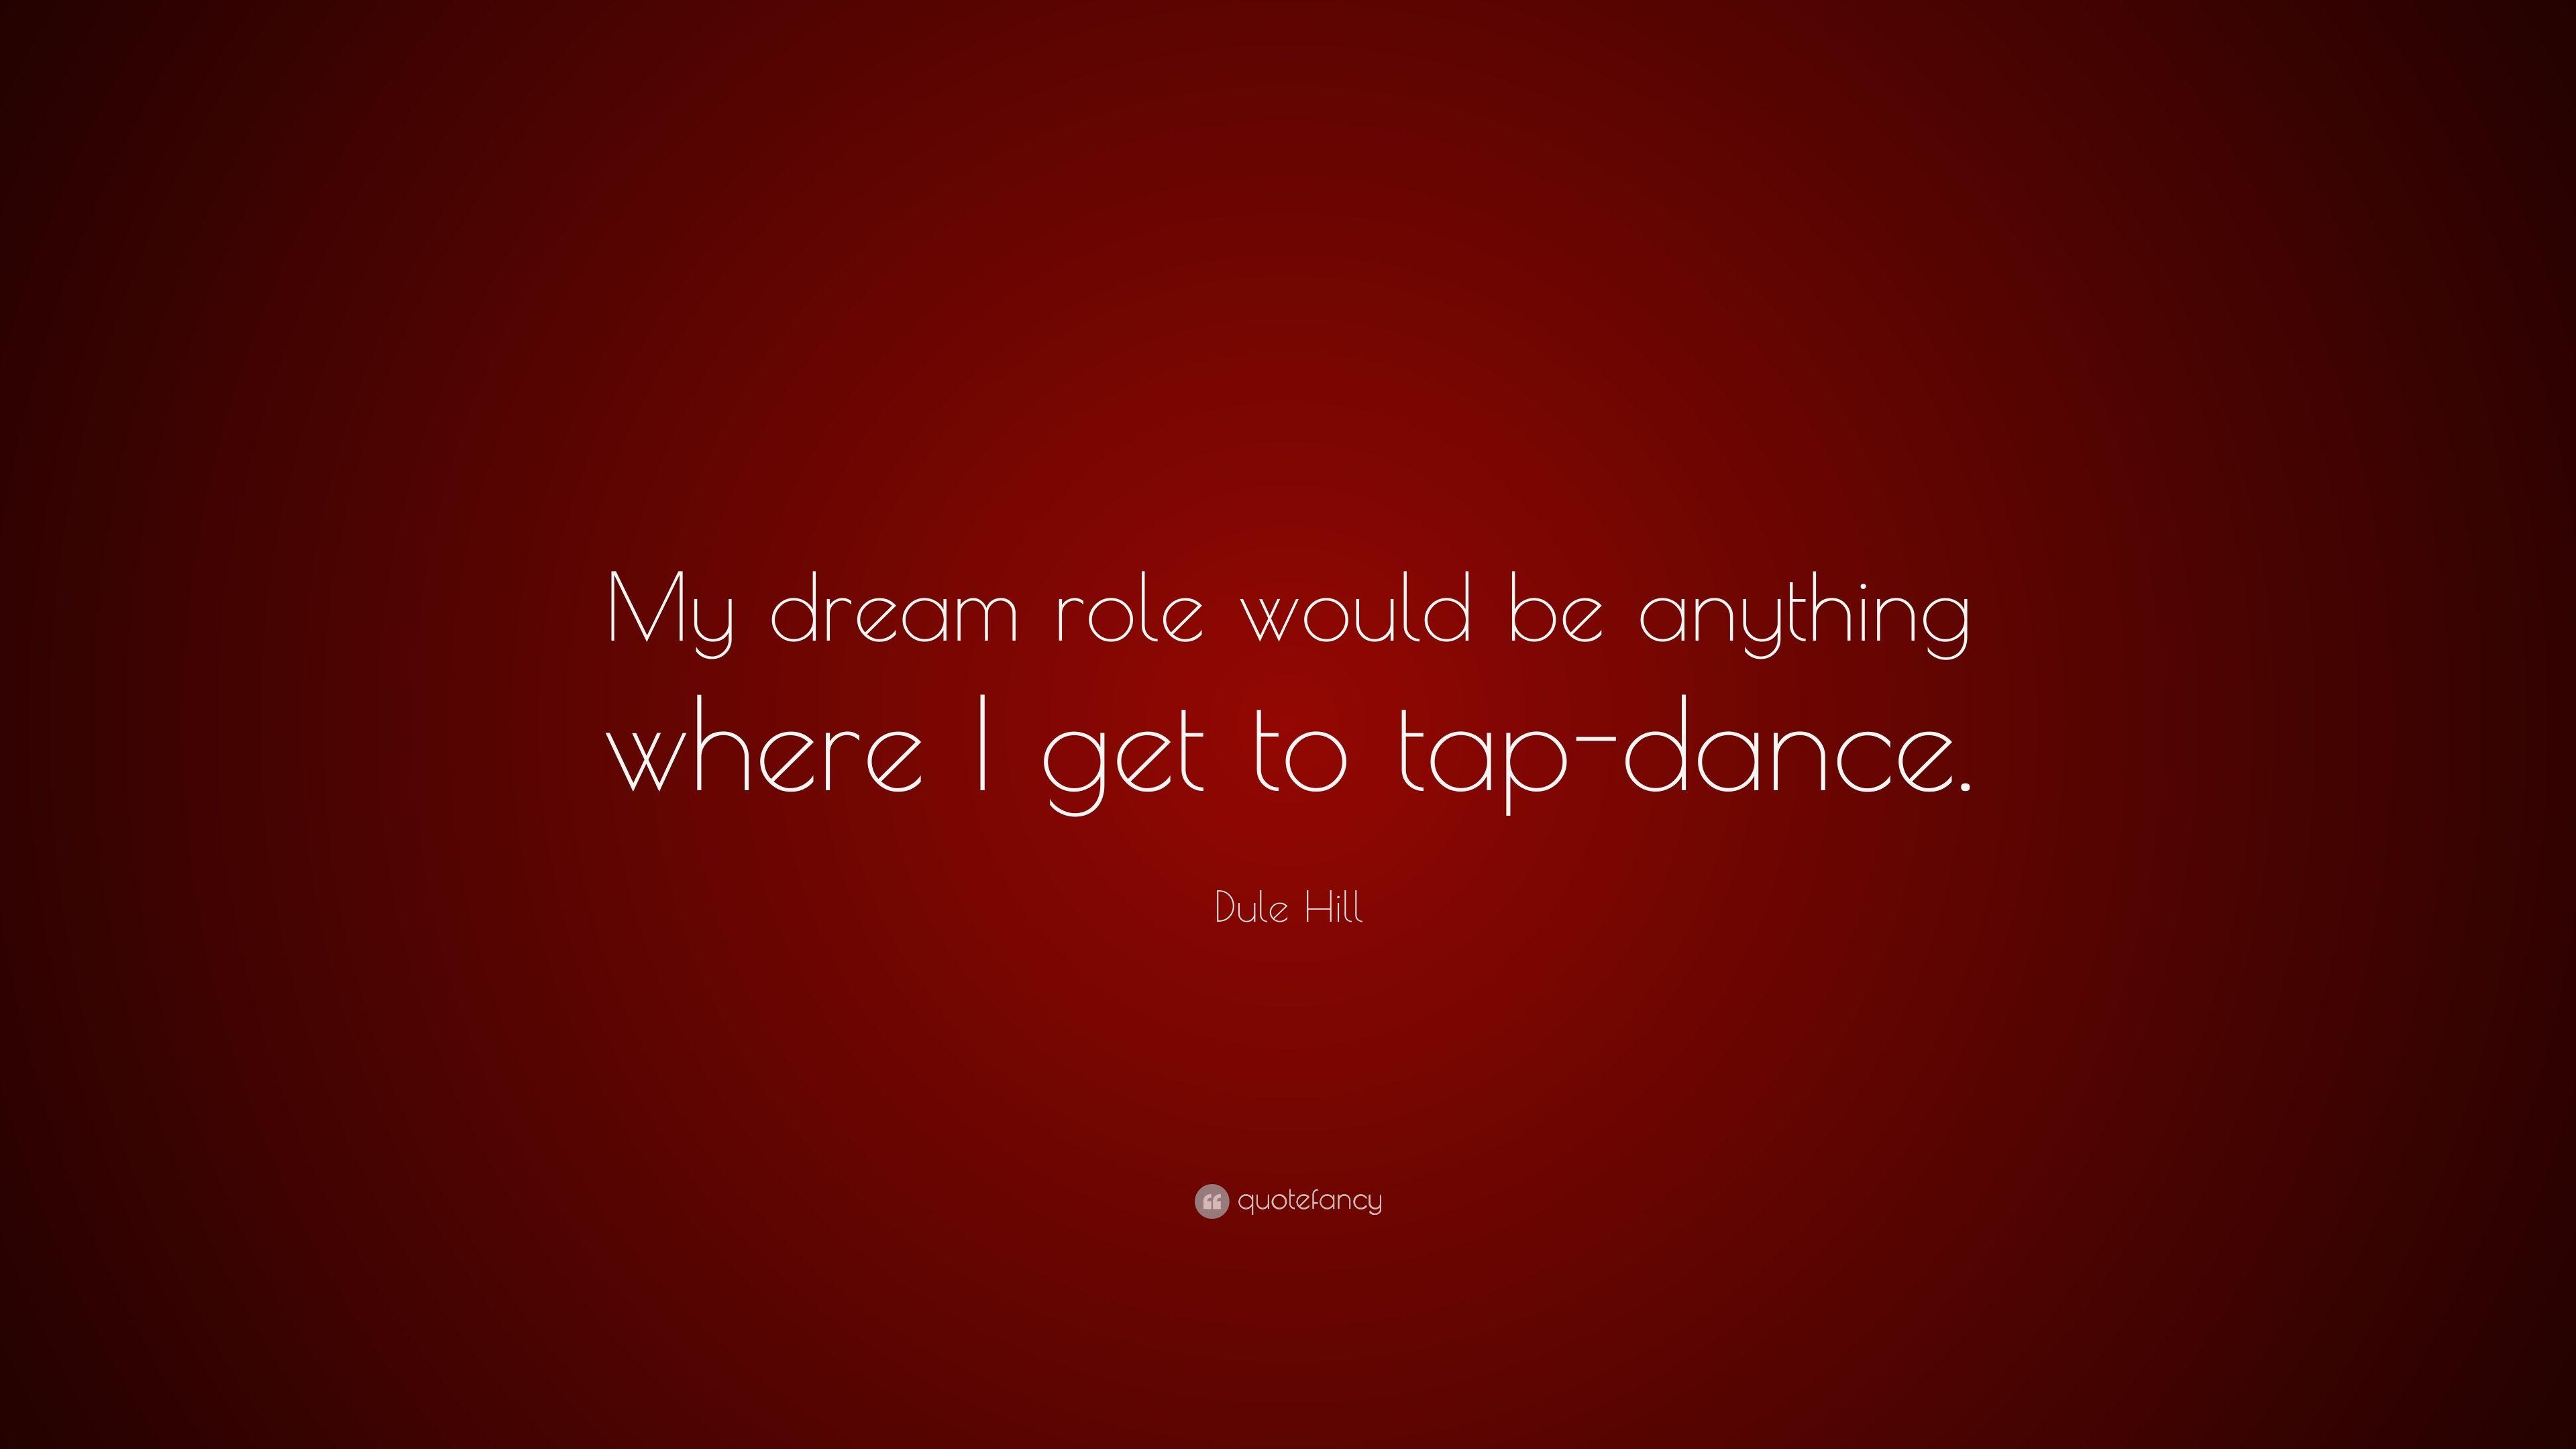 Dule Hill Quote: “My dream role would be anything where I get to tap